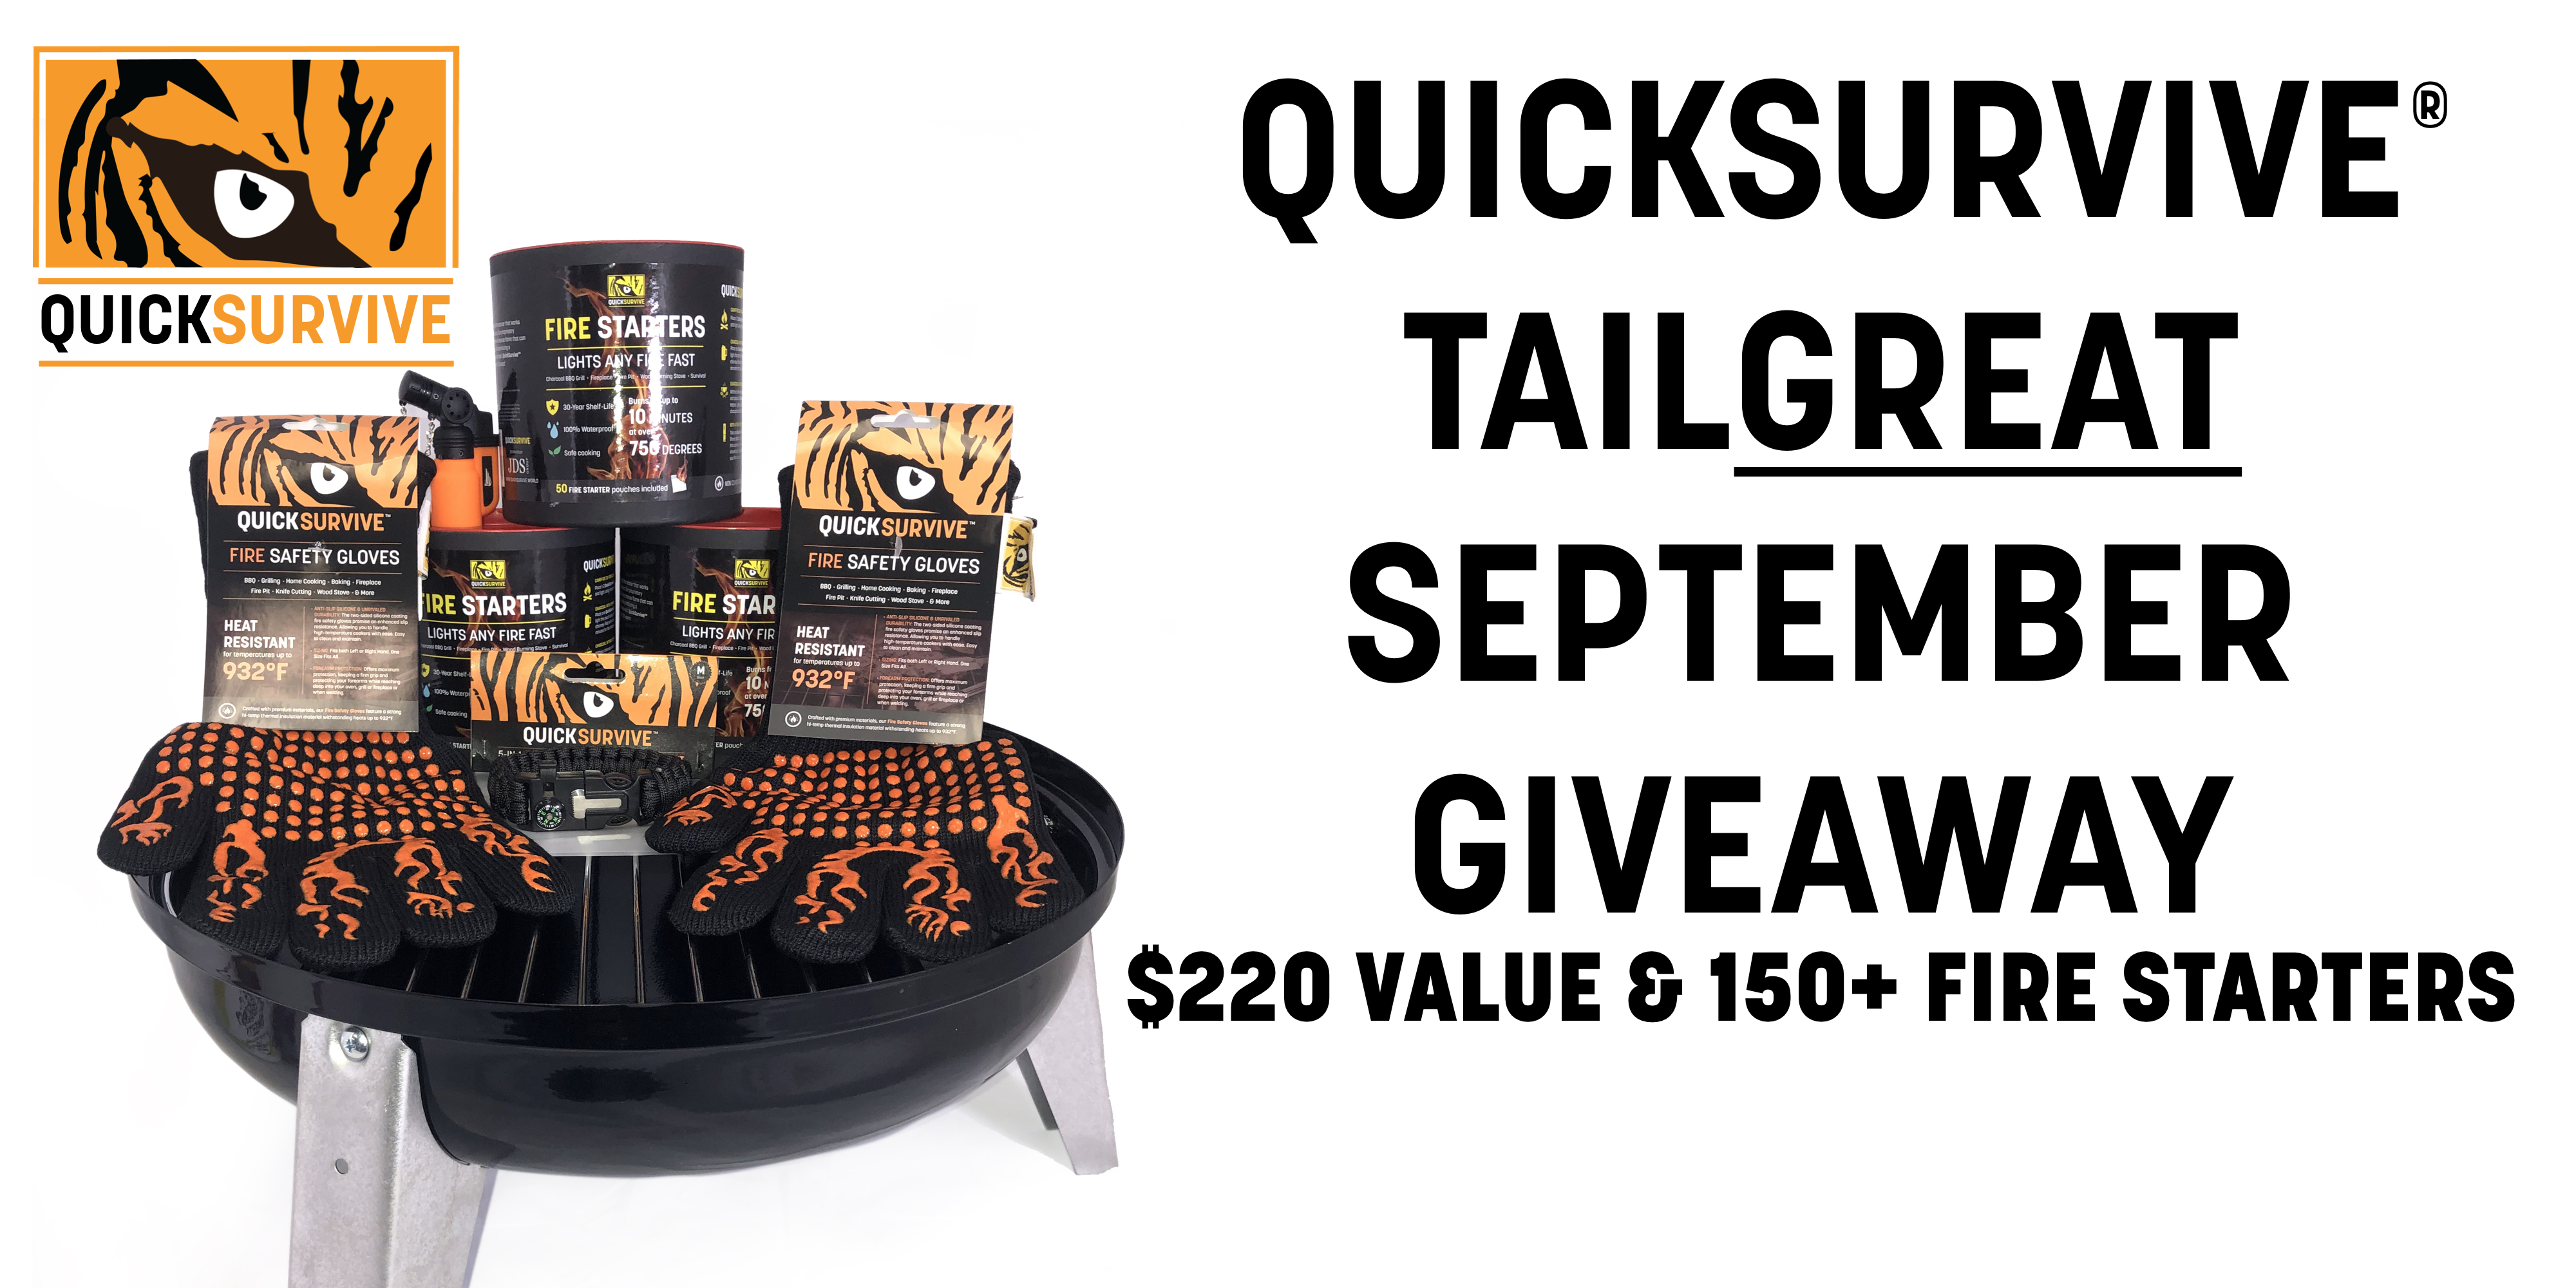 online contests, sweepstakes and giveaways - QuickSurvive® TailGREAT September Giveaway